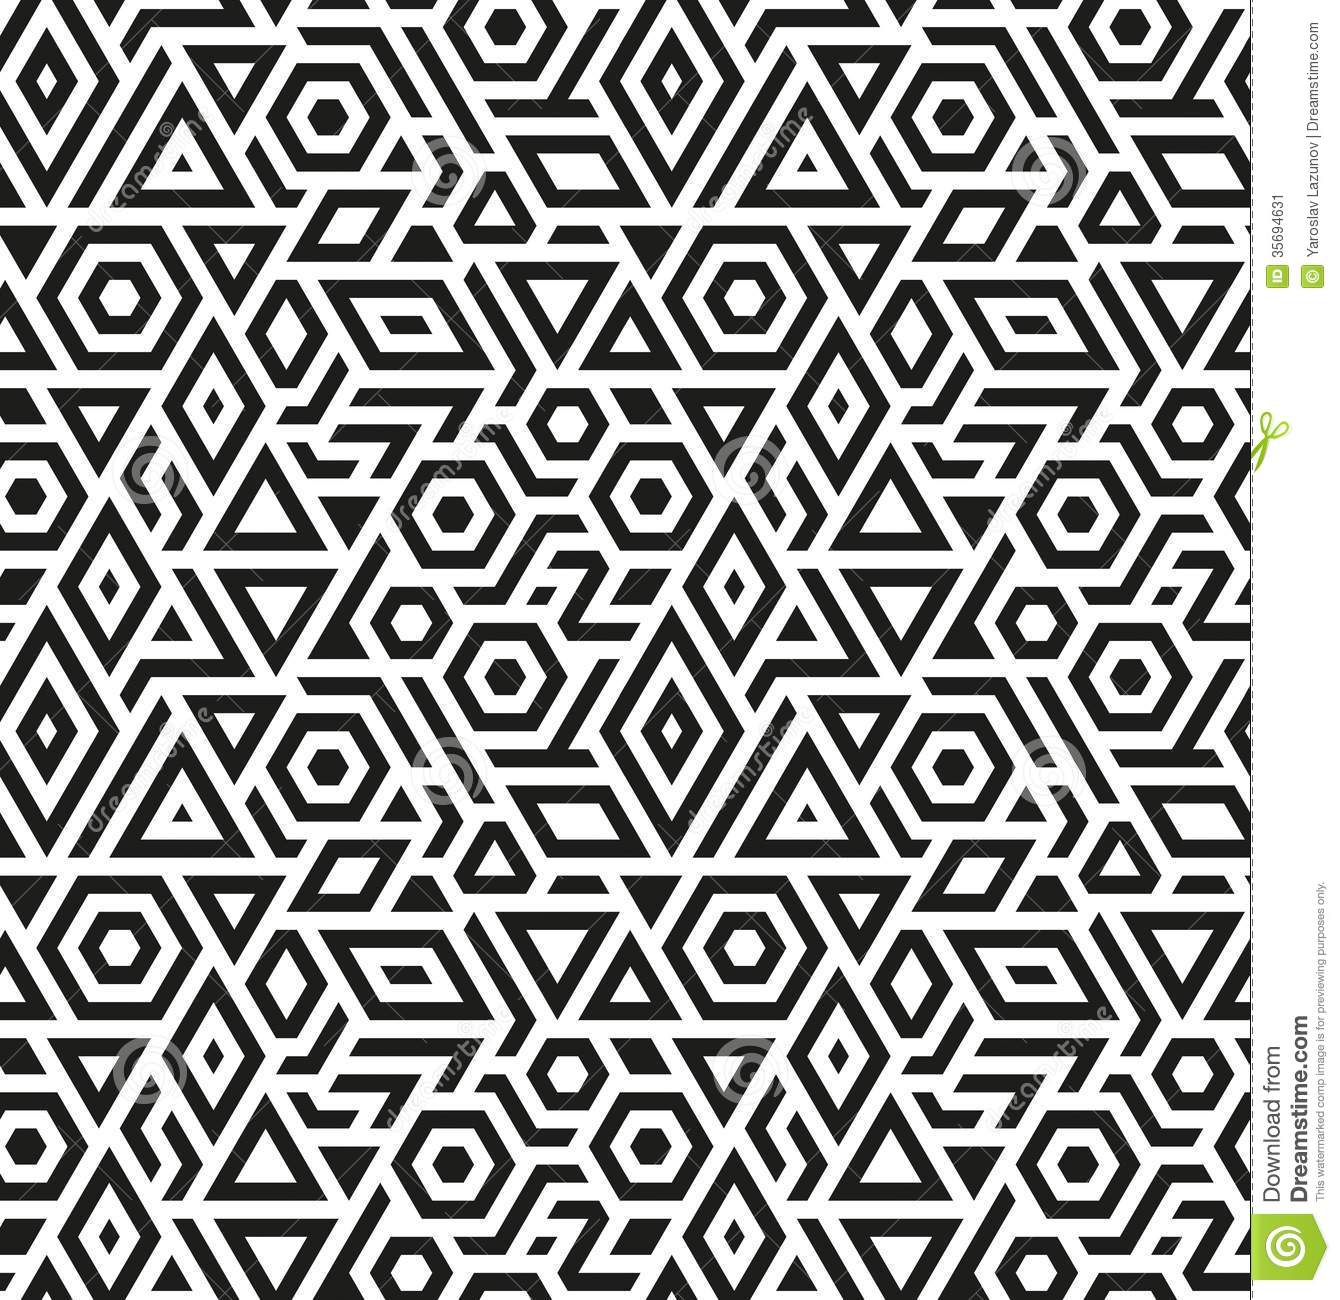 12 Free Vector Geometric Seamless Pattern Images